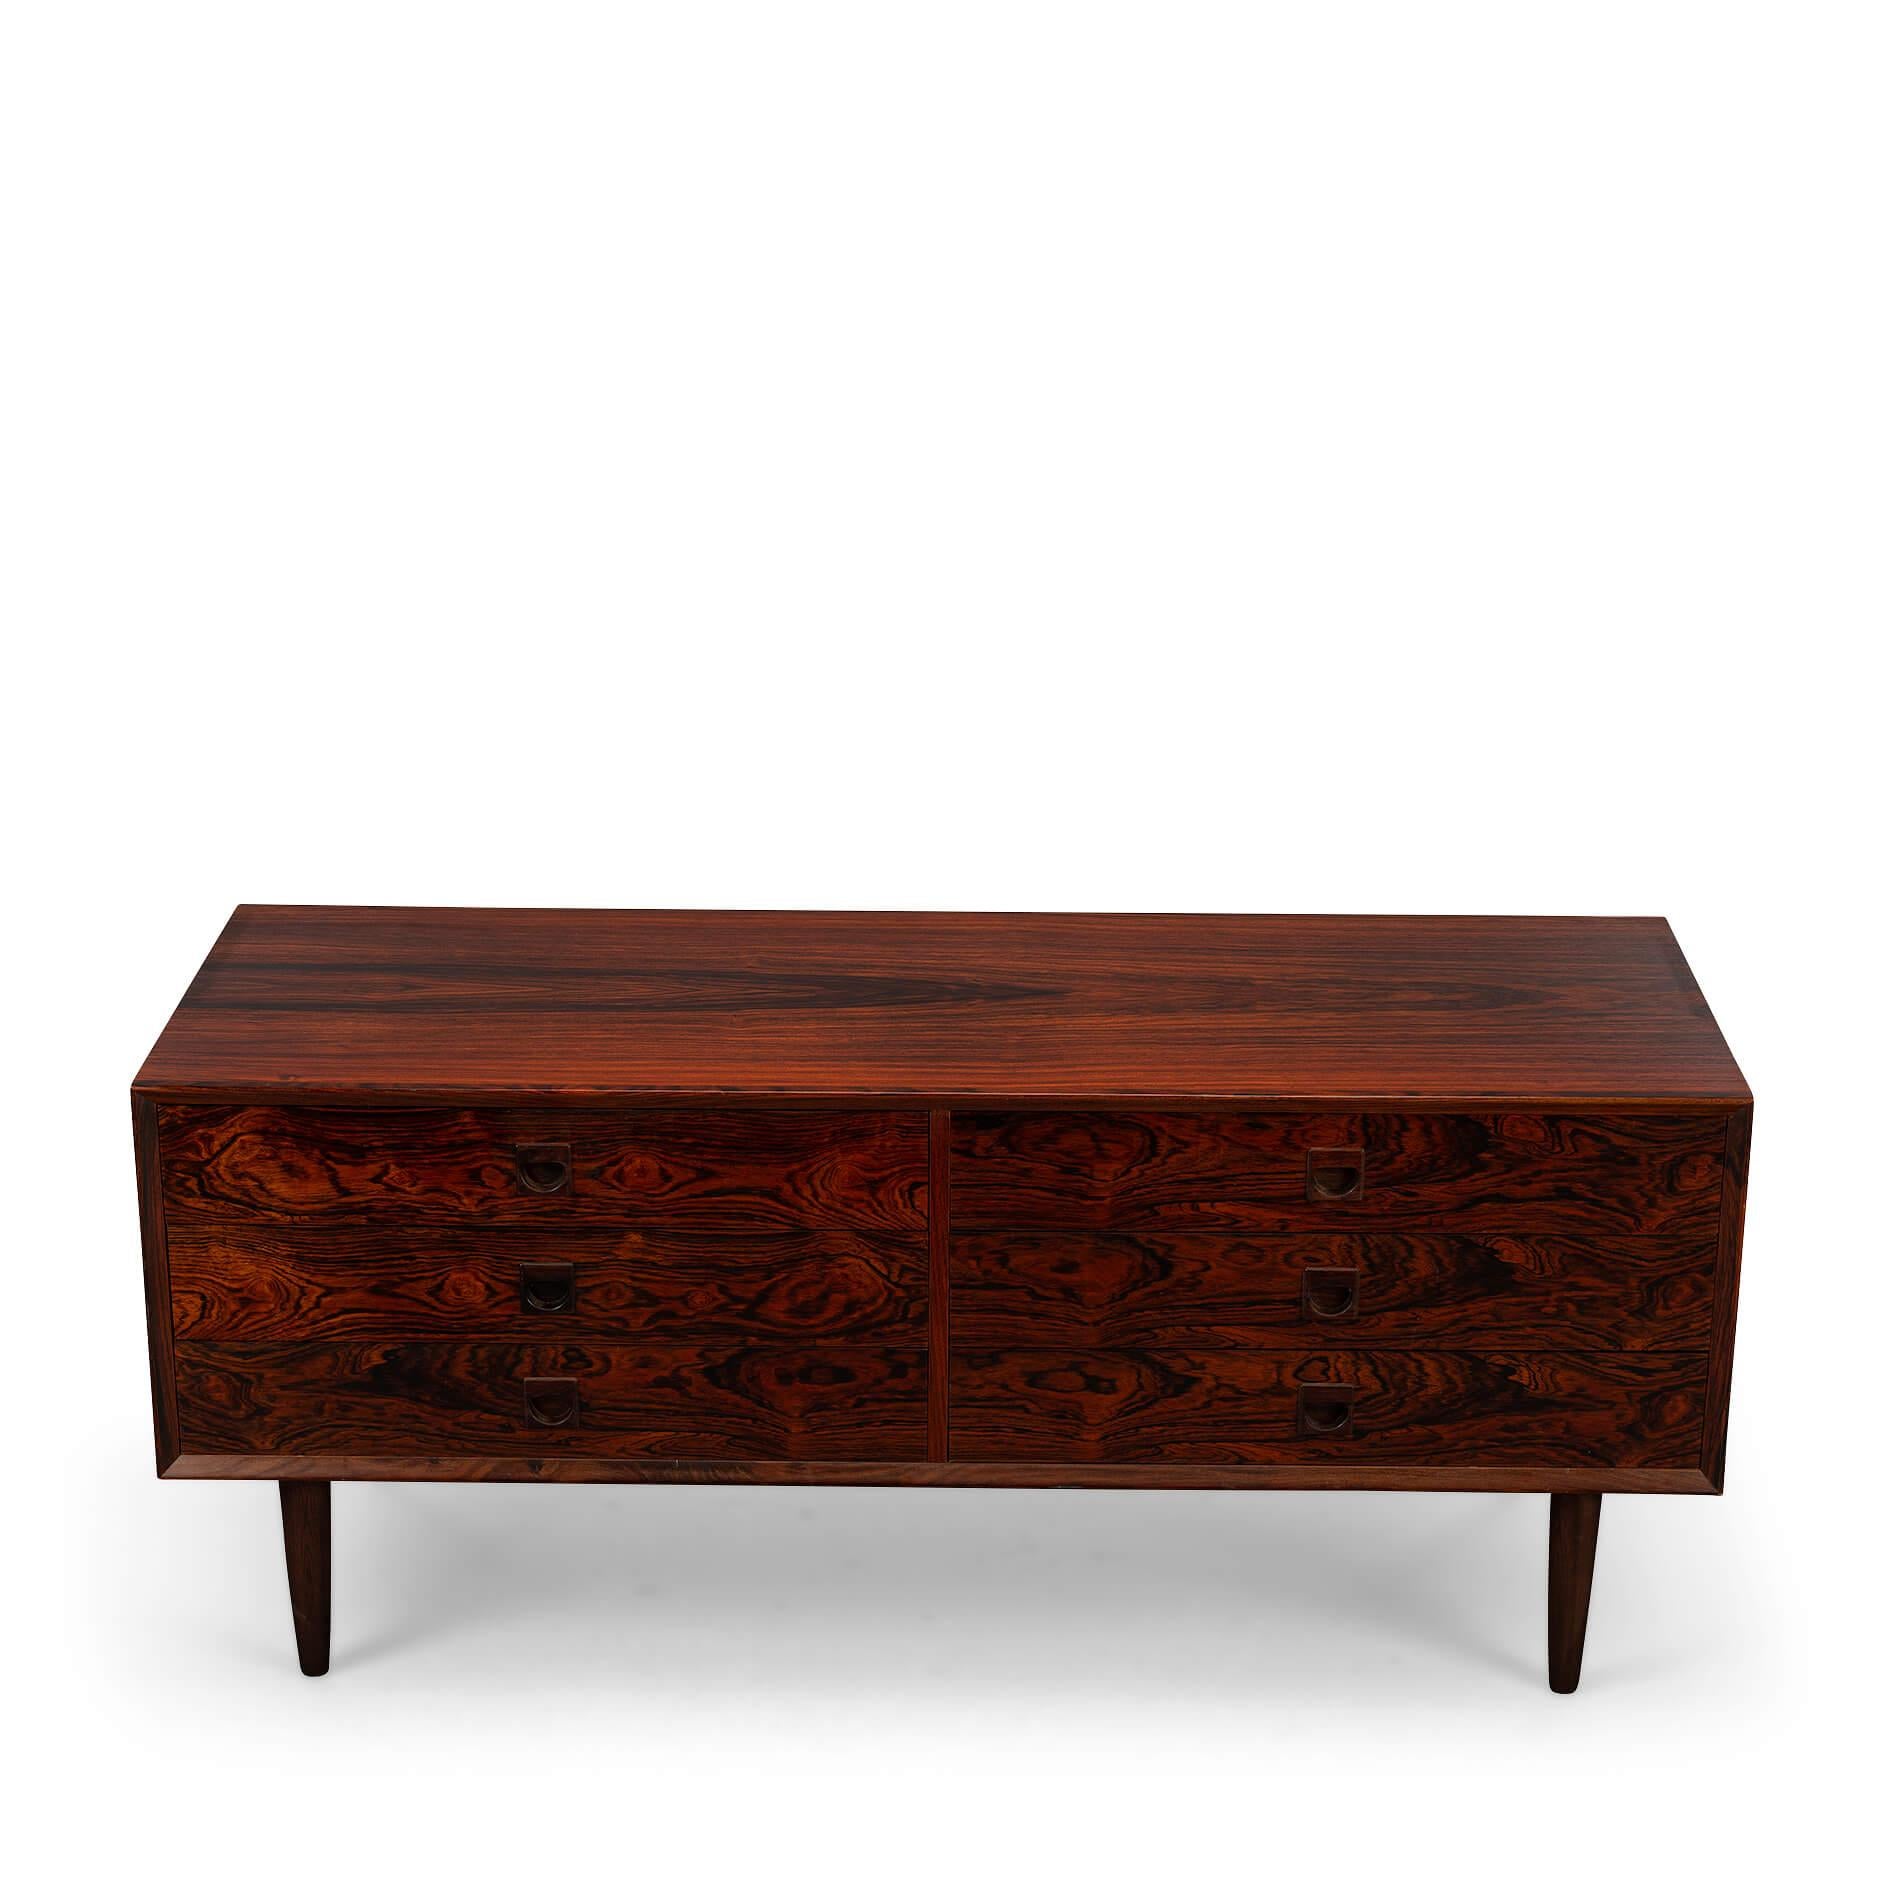 Rosewood chest of drawers
A beautiful low chest of drawers by Brouer made of expressive rosewood. The color is a beautiful reddish darkbrown. The cool grips and patterning of the wood make this one a true eye catcher. The top left drawer is covered